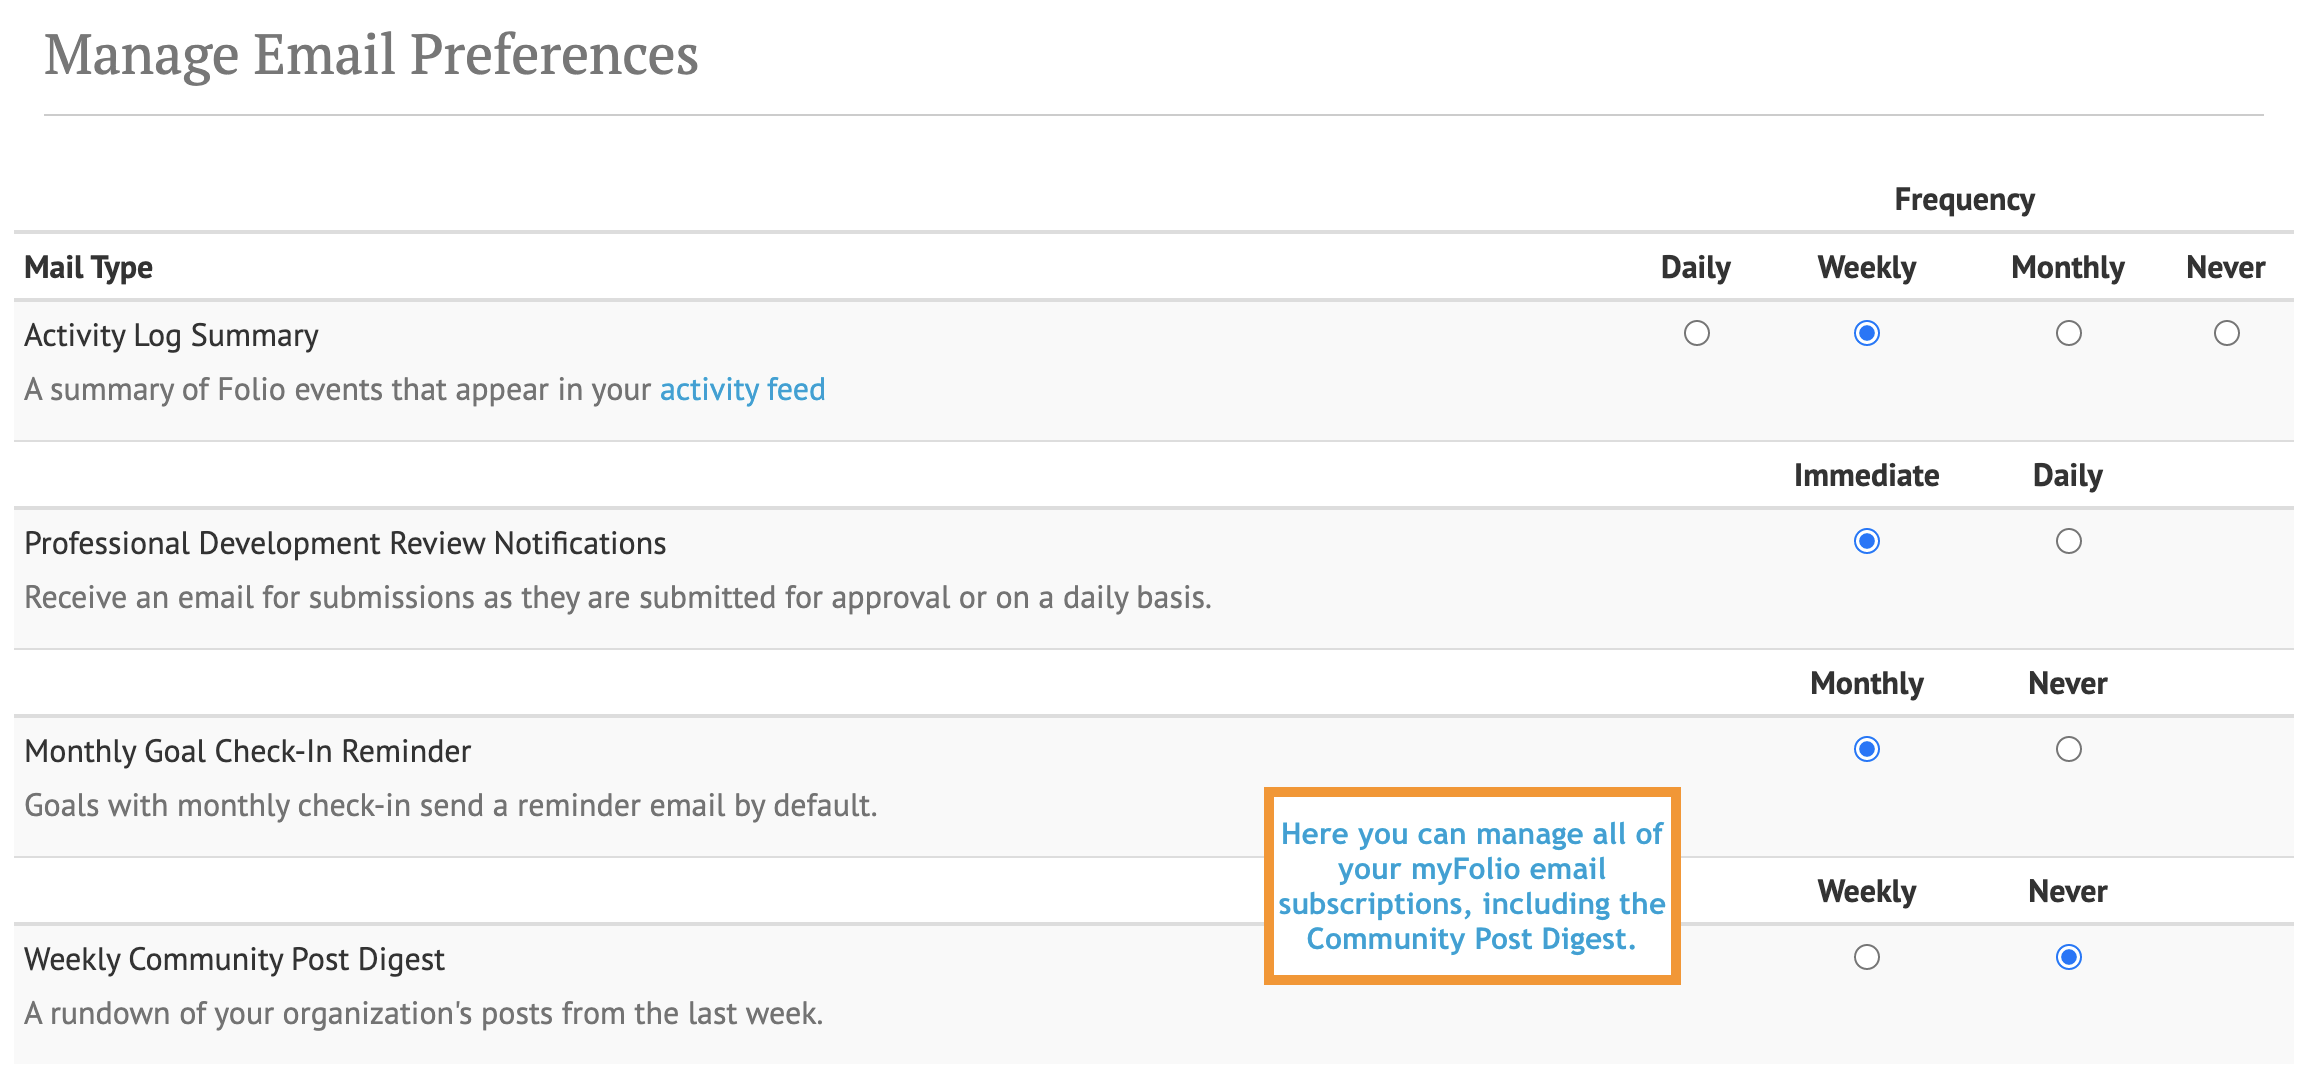 Manage_Email_Preferences-annotated.png